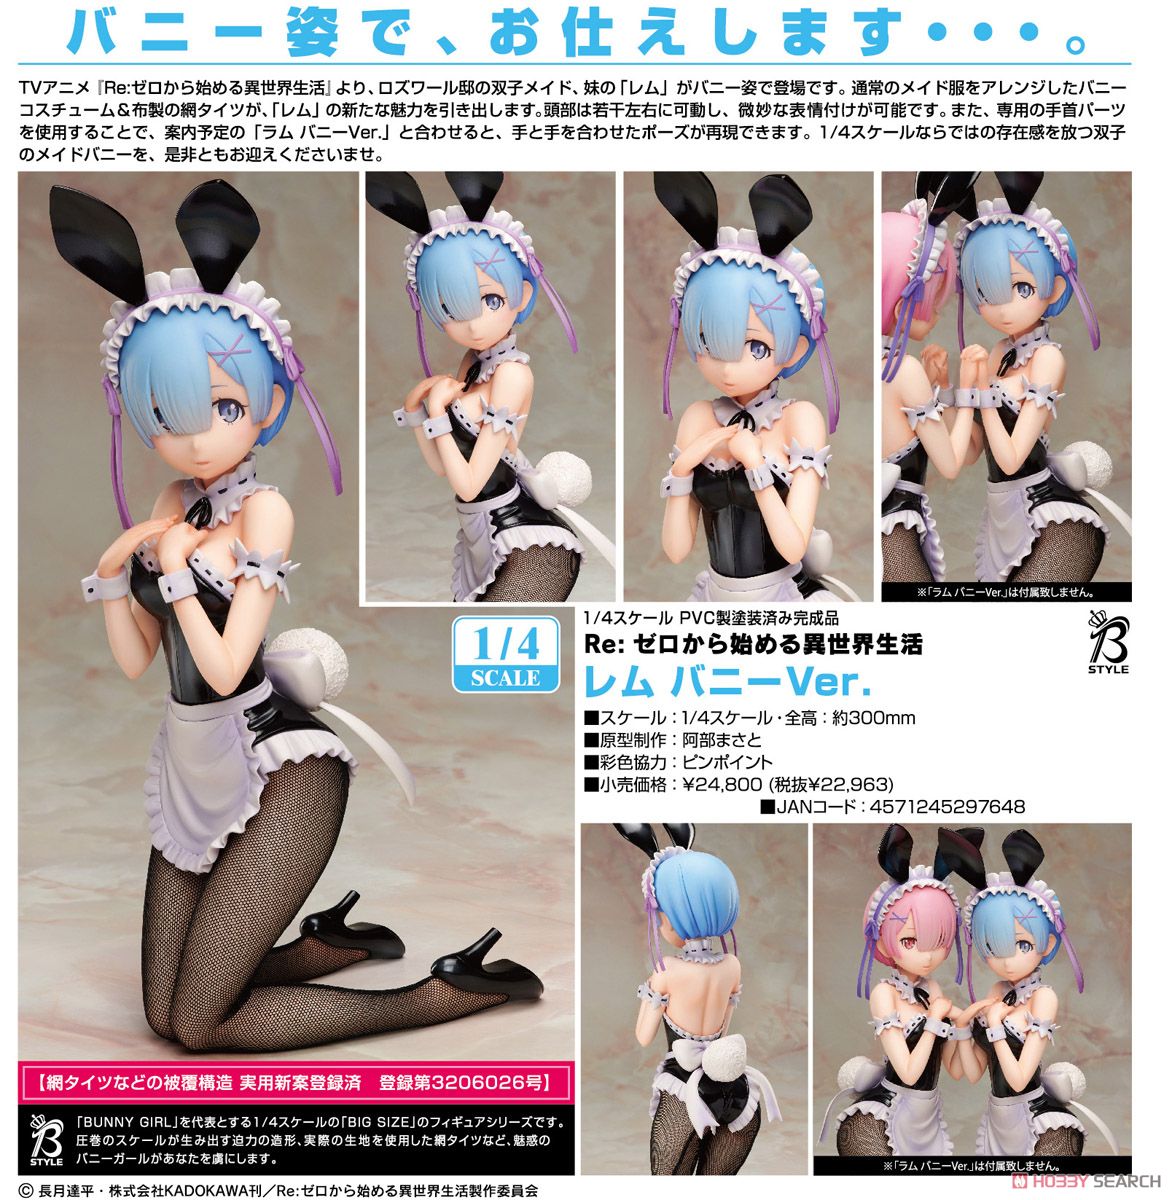 B-STYLE - Re:ZERO -Starting Life in Another World-: Rem Bunny Ver. 1/4 Figur